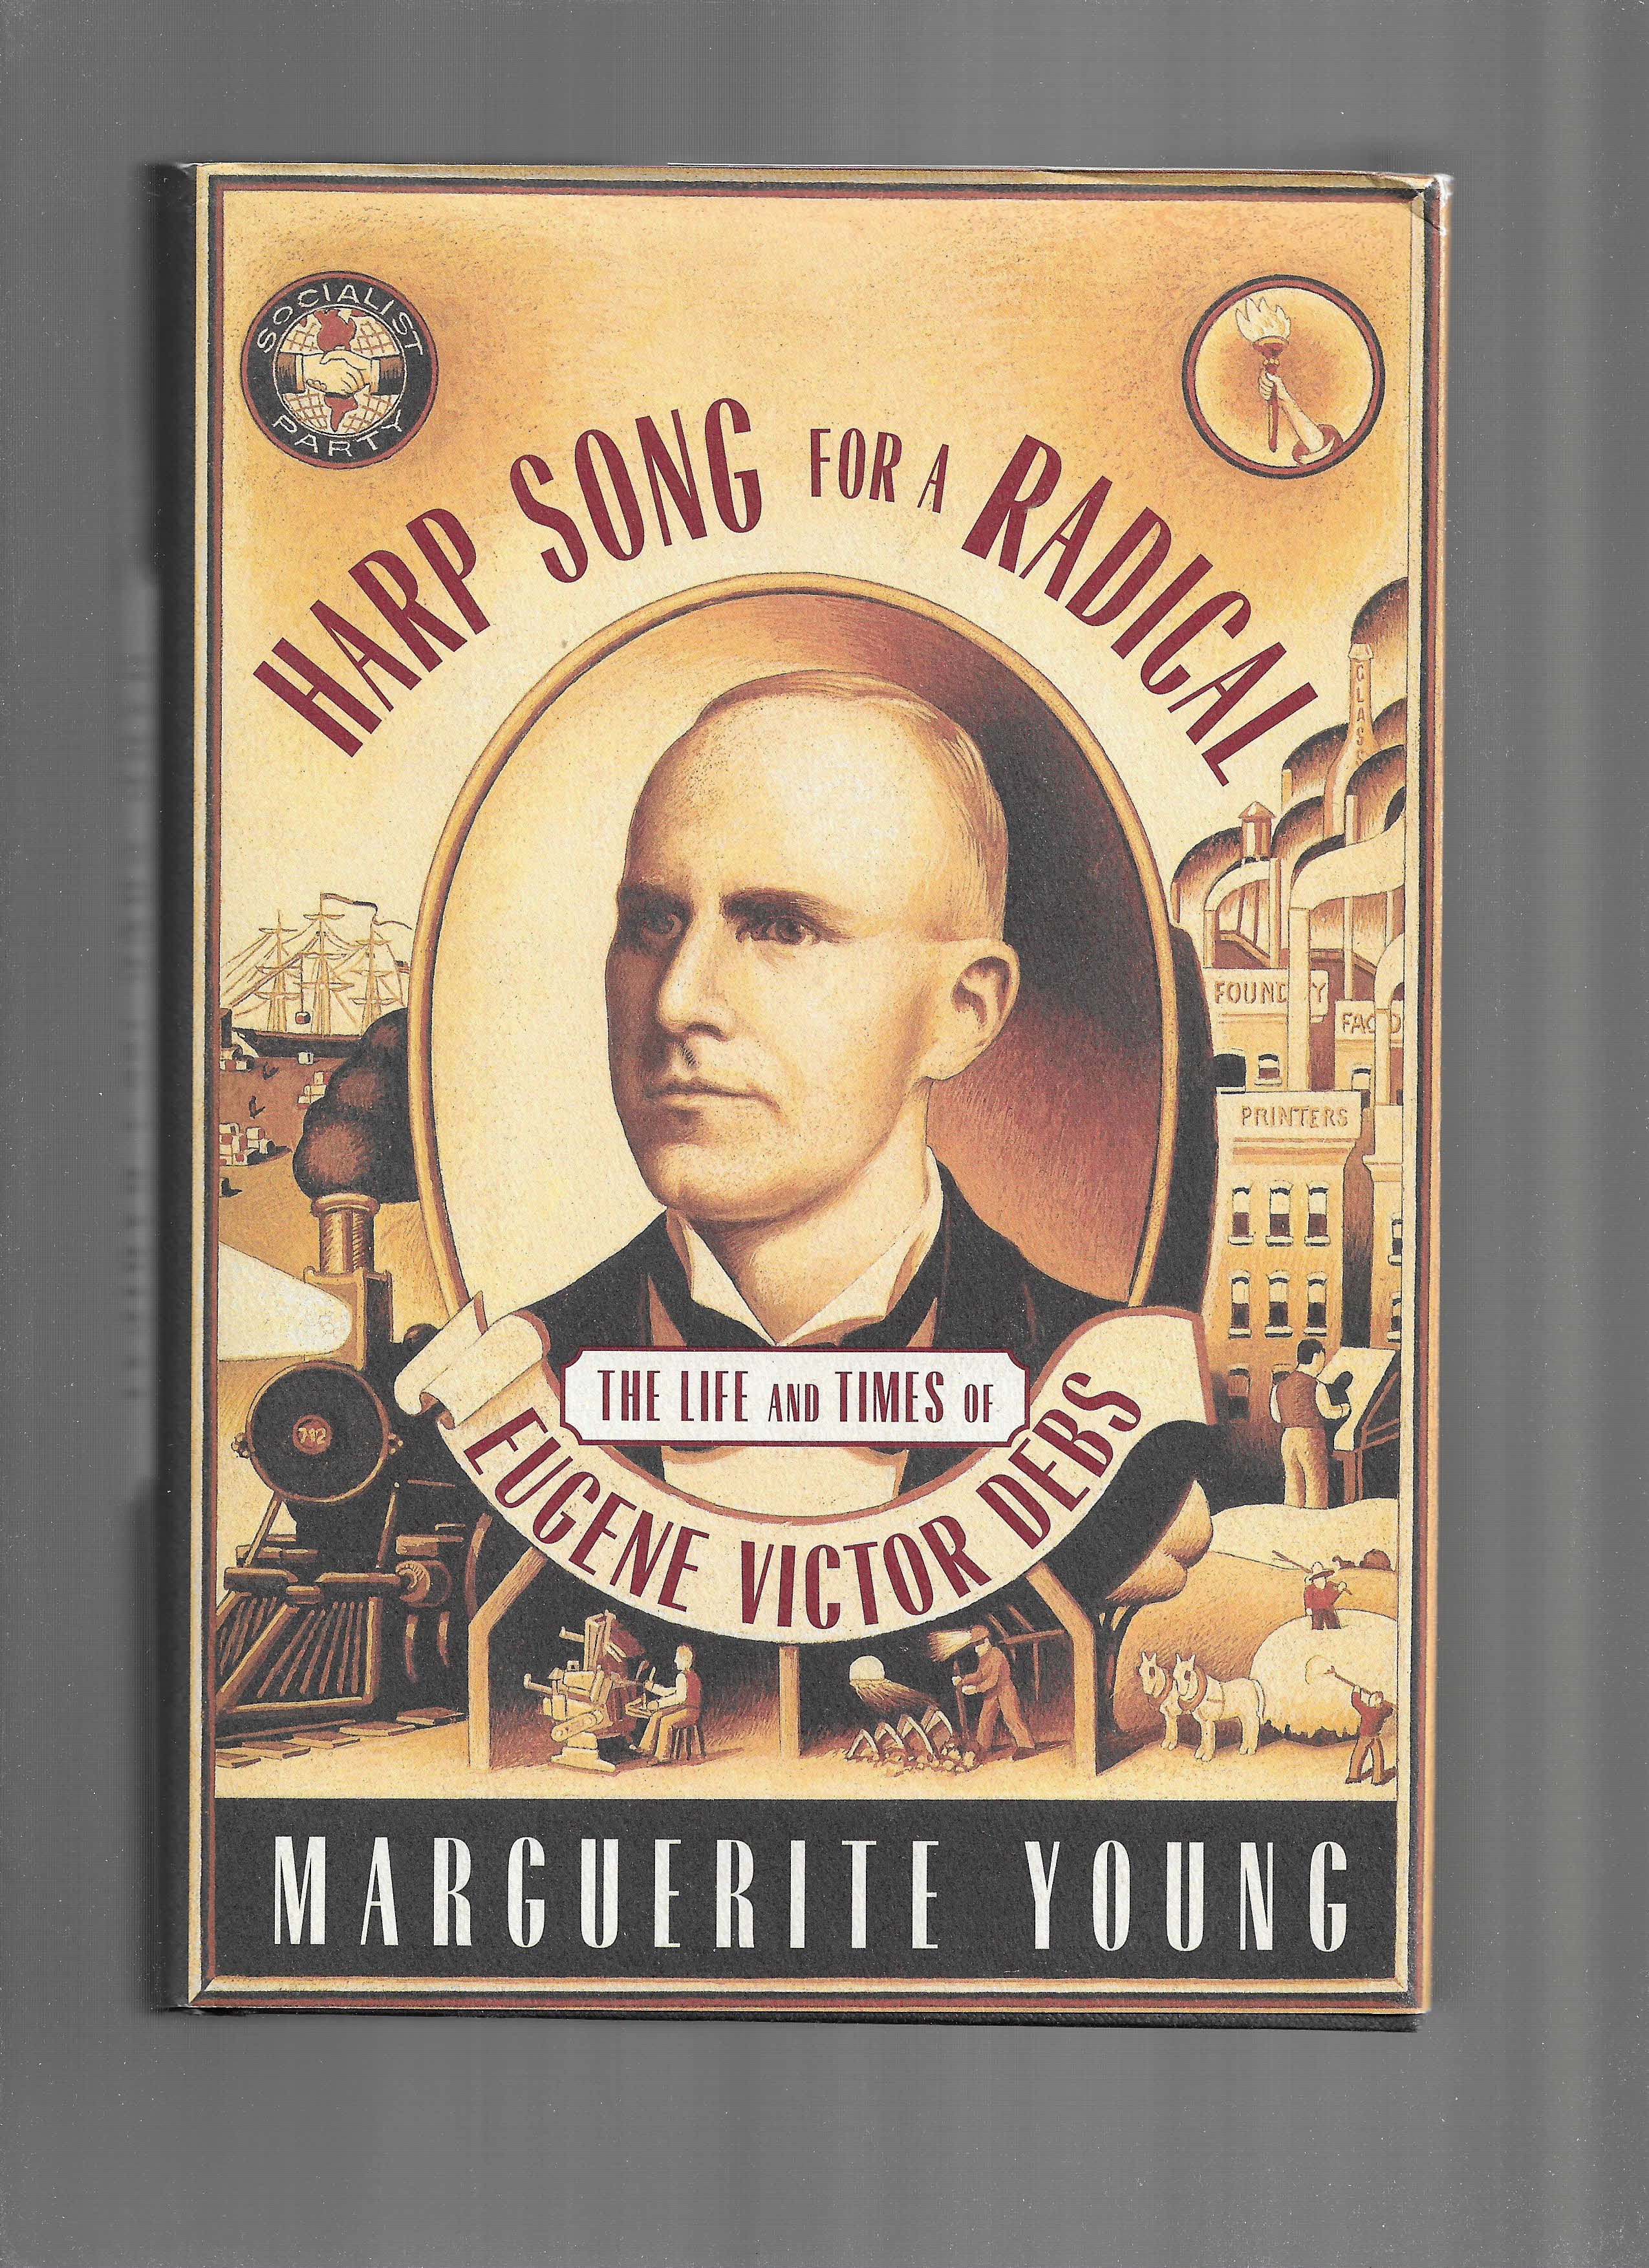 HARP SONG FOR A RADICAL: The Life And Times Of Eugene Victor Debs. Edited And With An Introduction By Charles Ruas.